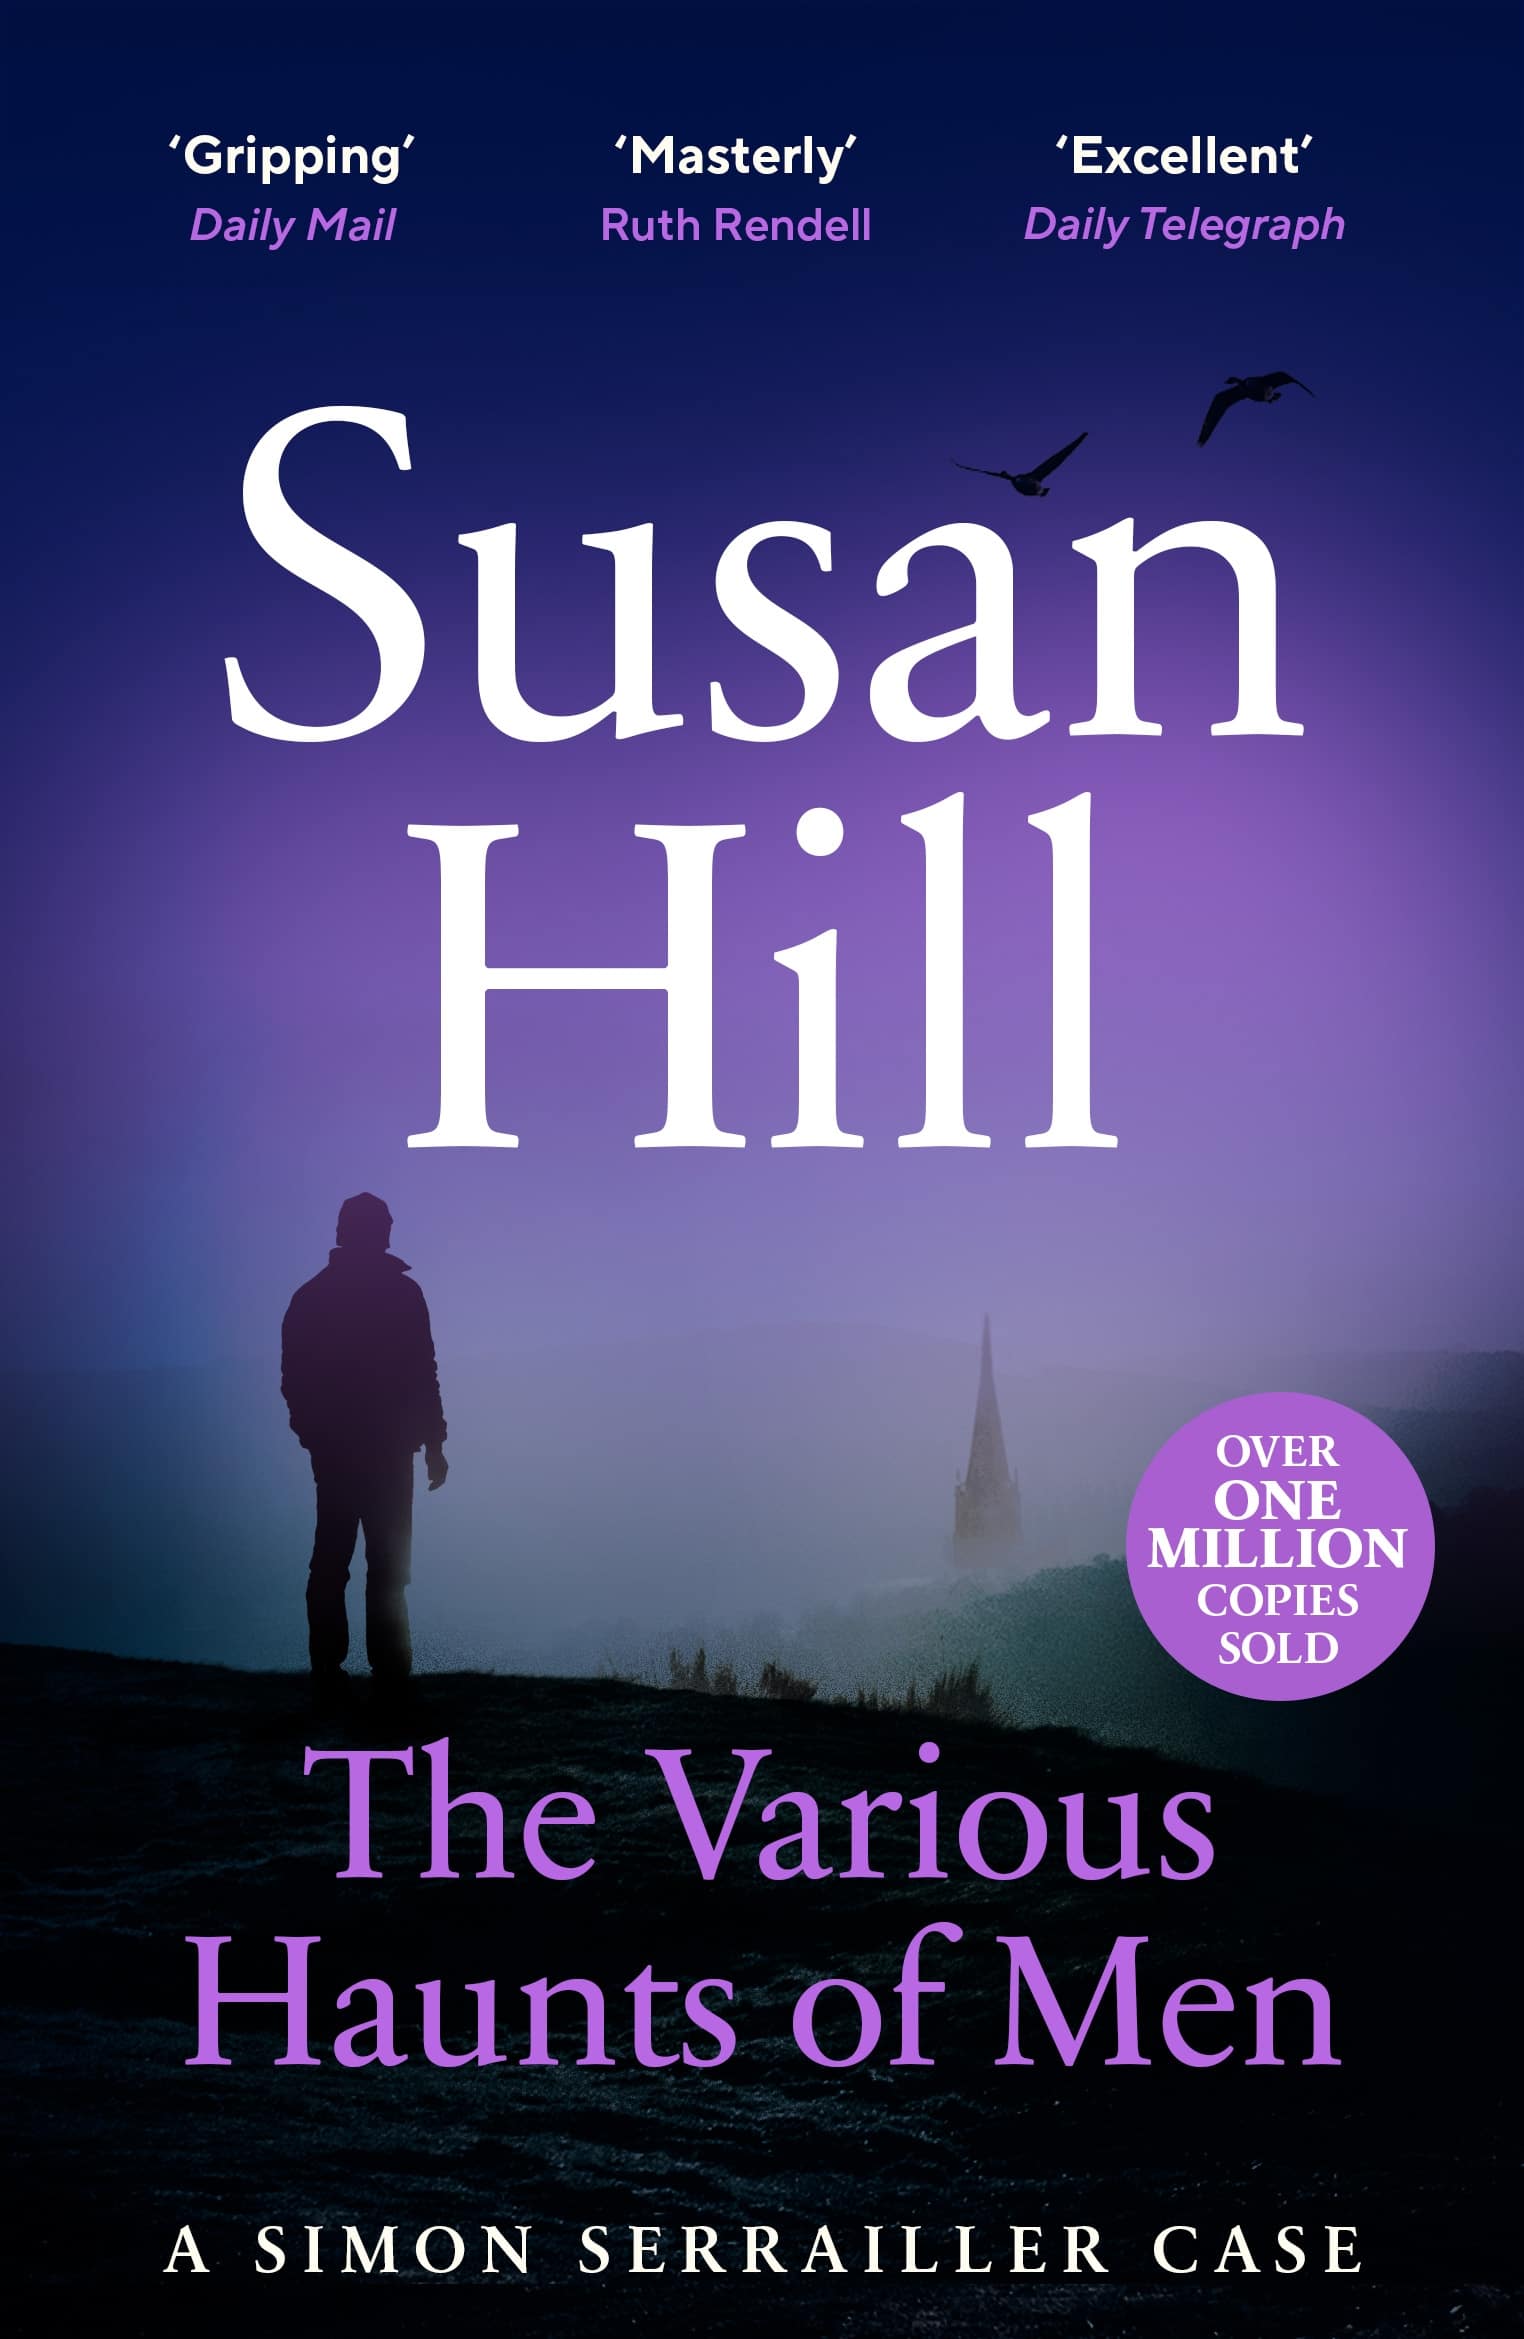 Cover of the Various Haunts of Men by Susan Hill